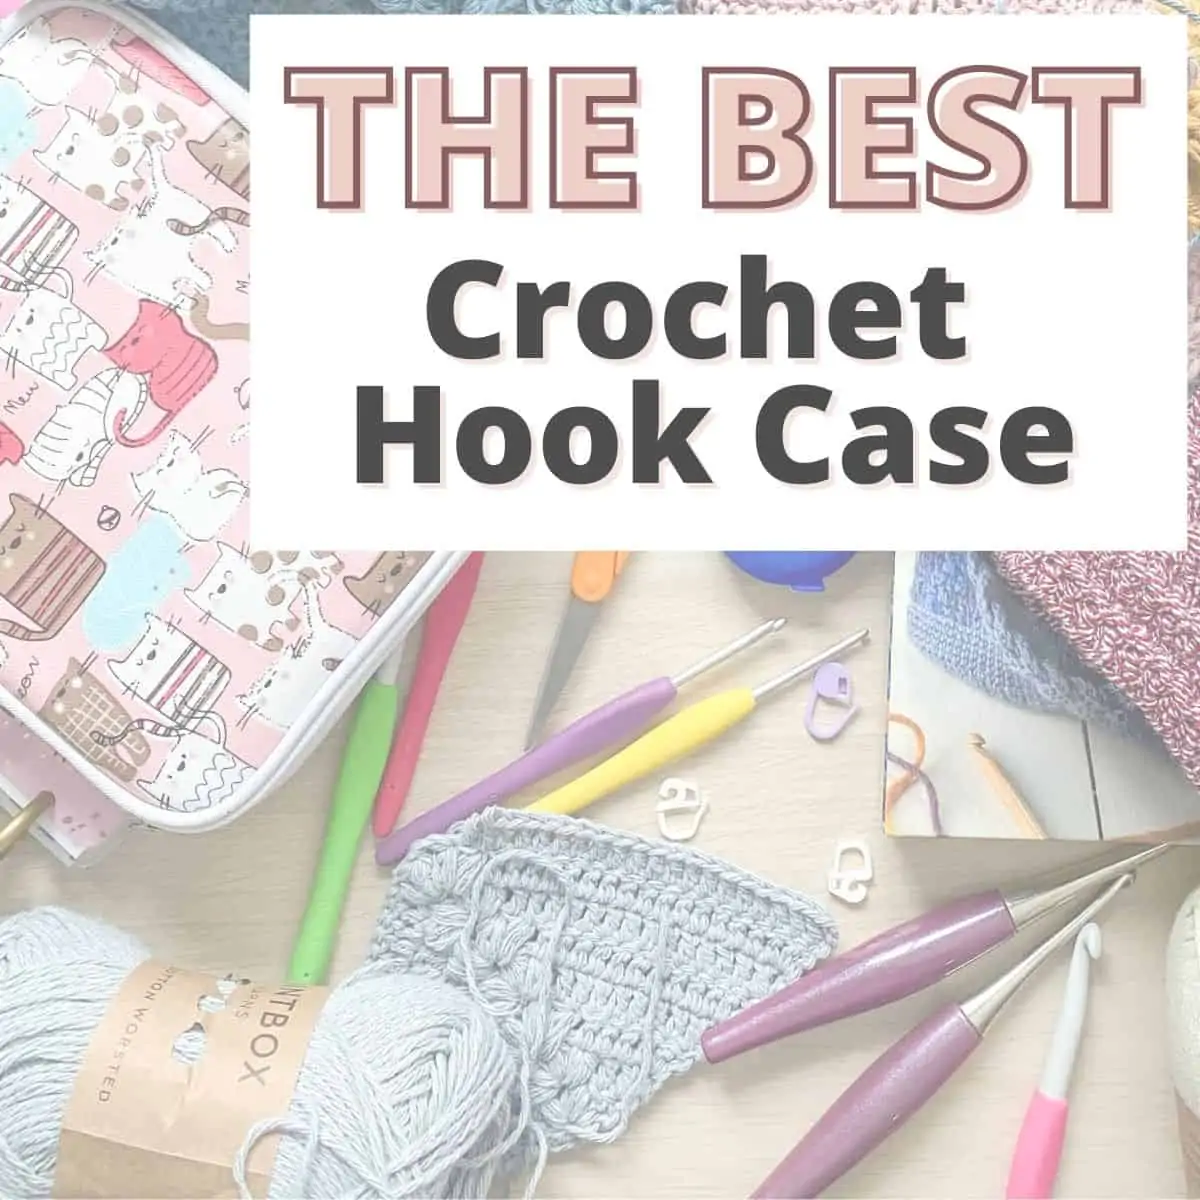 background showing crochet hooks, crochet hook storage bag and crochet projects with words the best crochet hook case